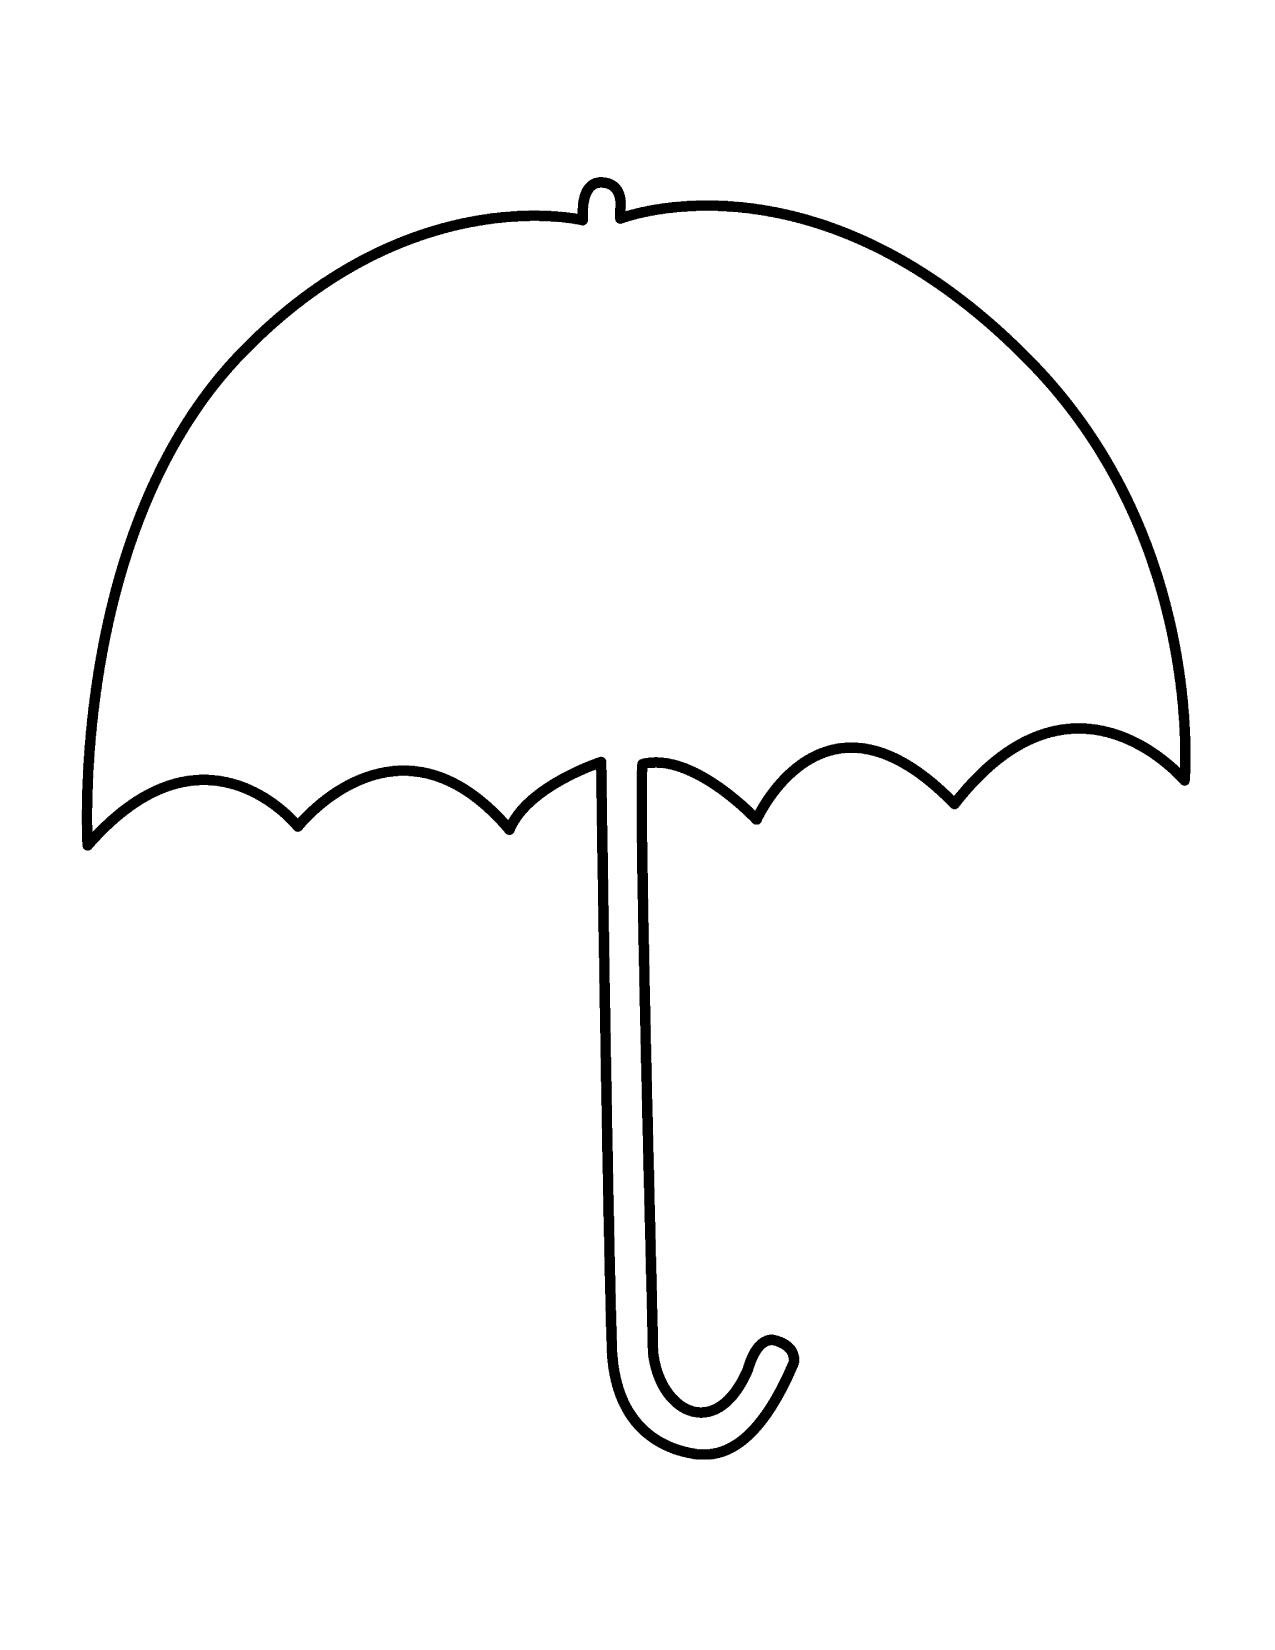 closed-umbrella-drawing-free-download-on-clipartmag